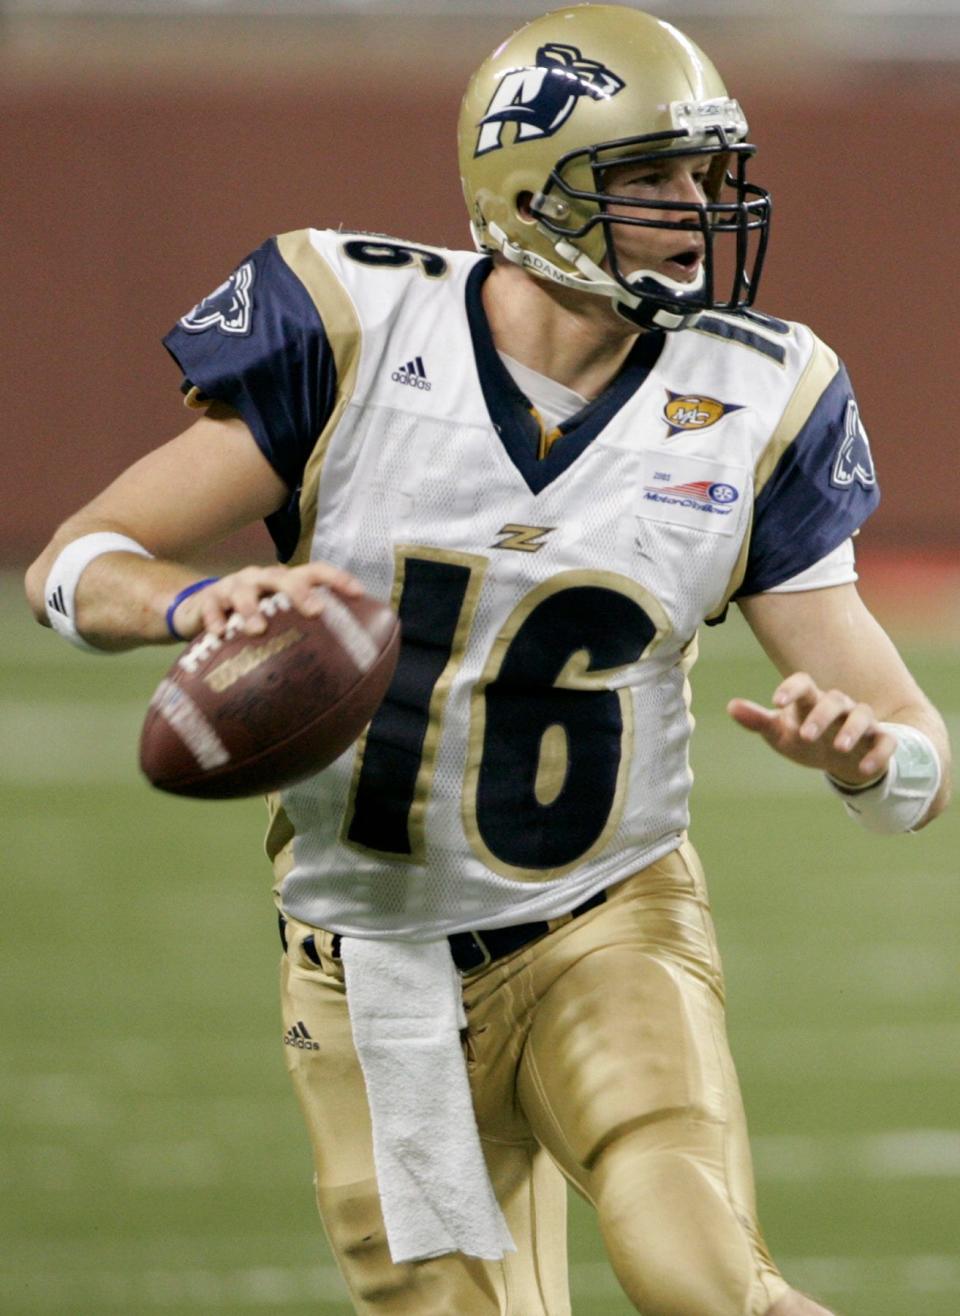 Former University of Akron quarterback Luke Getsy led the Zips to the Mid-American Conference championship and the Motor City Bowl in 2005. The Chicago Bears hired Getsy on Sunday to be their offensive coordinator. [Mike Cardew/Beacon Journal]